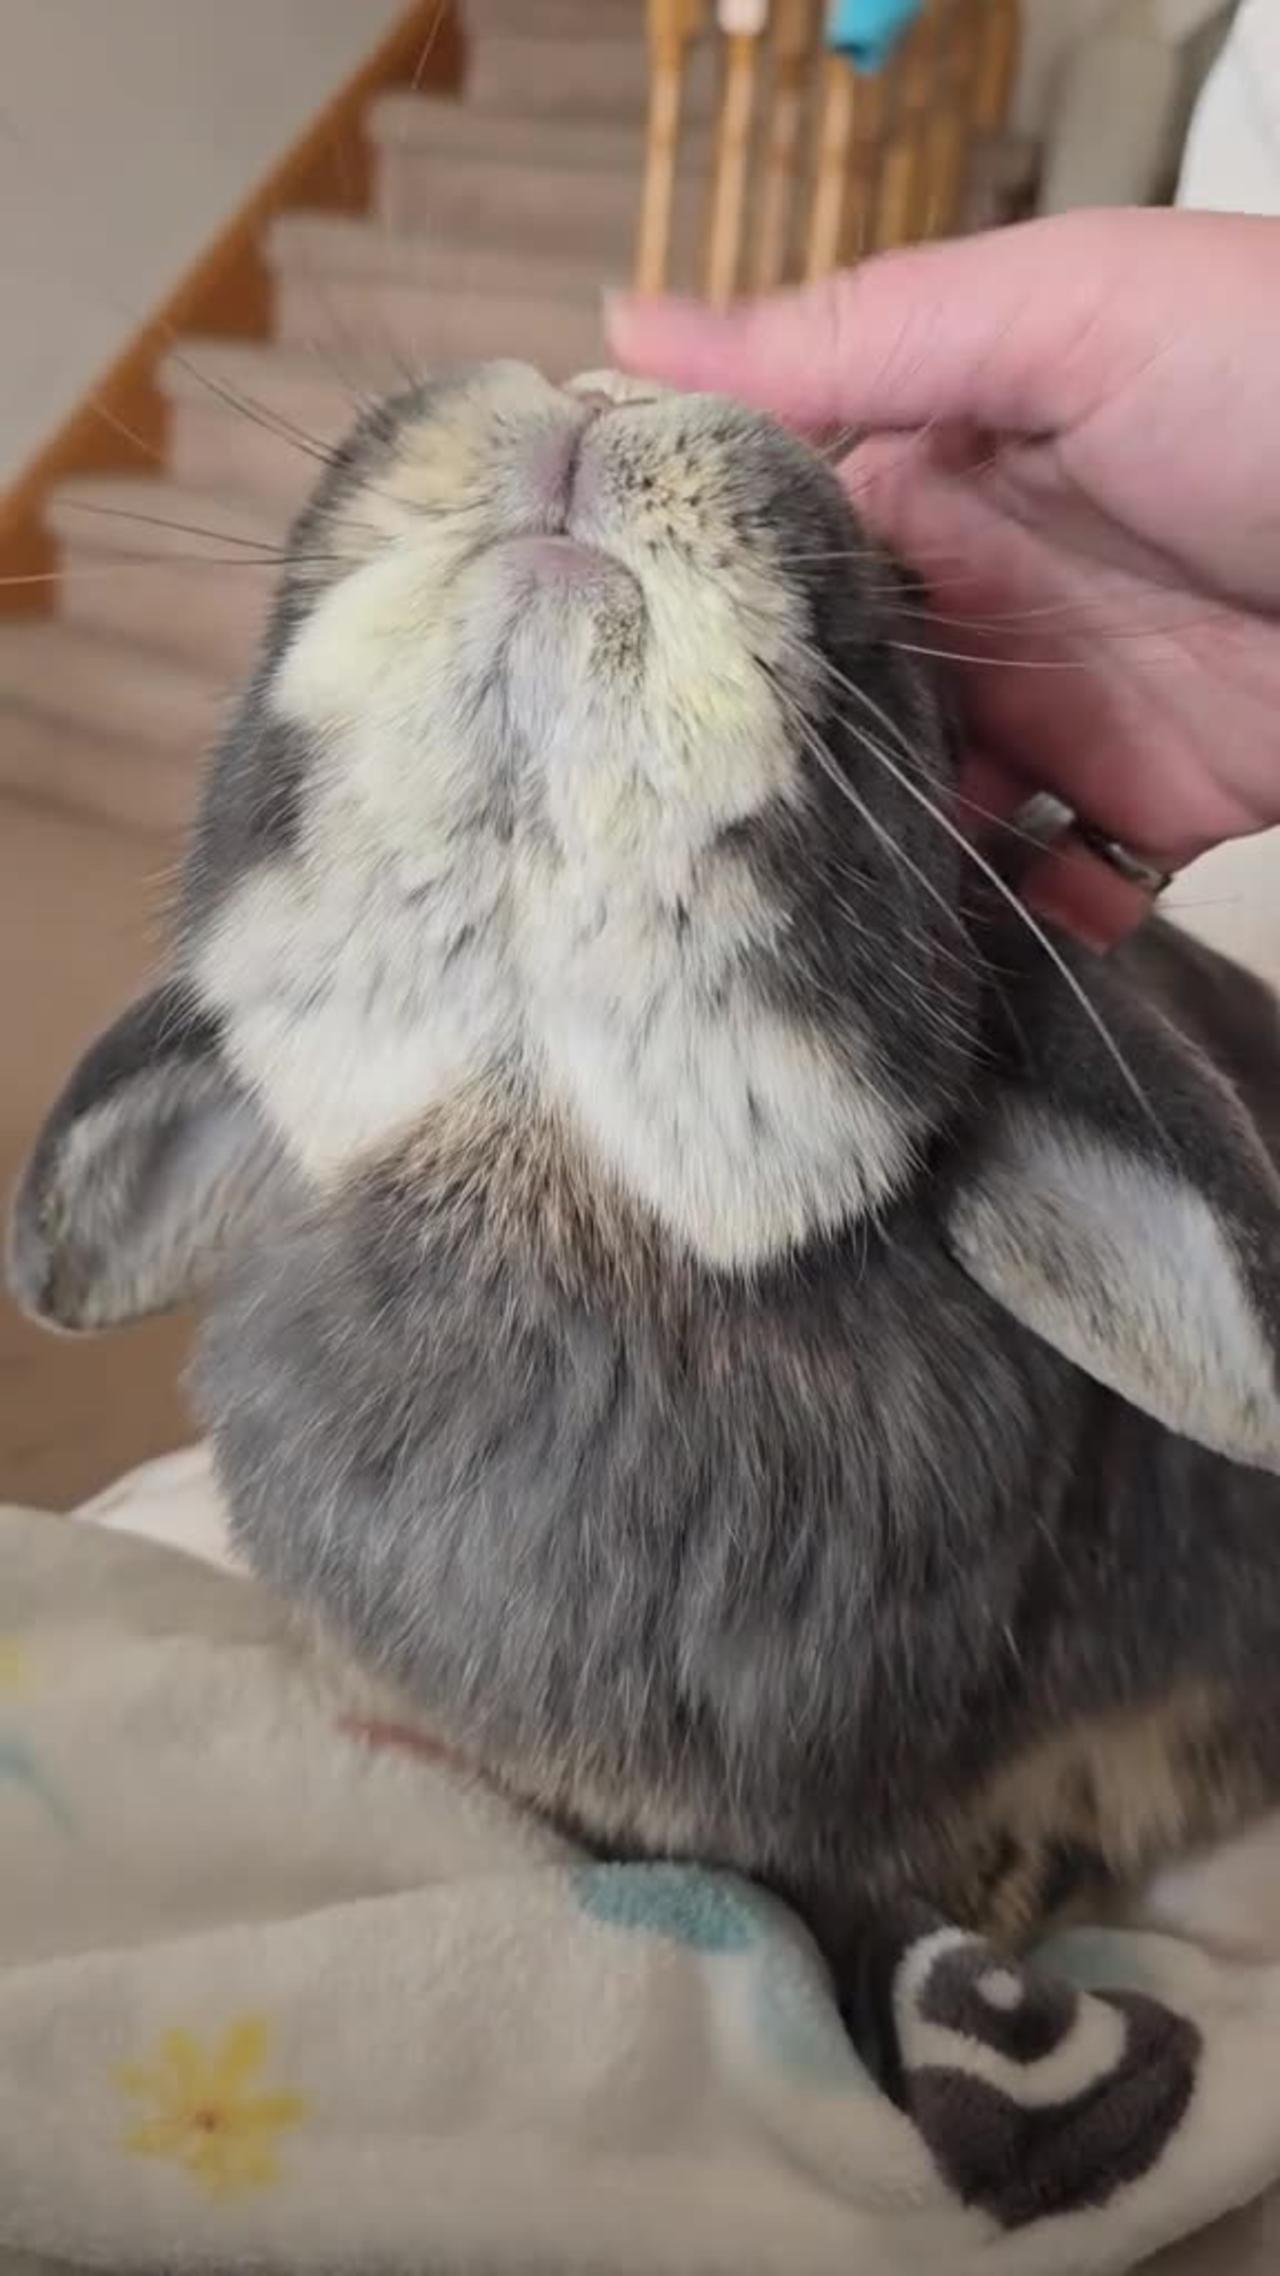 5.Nose scratches are pure bunny bliss  did you catch the mlem